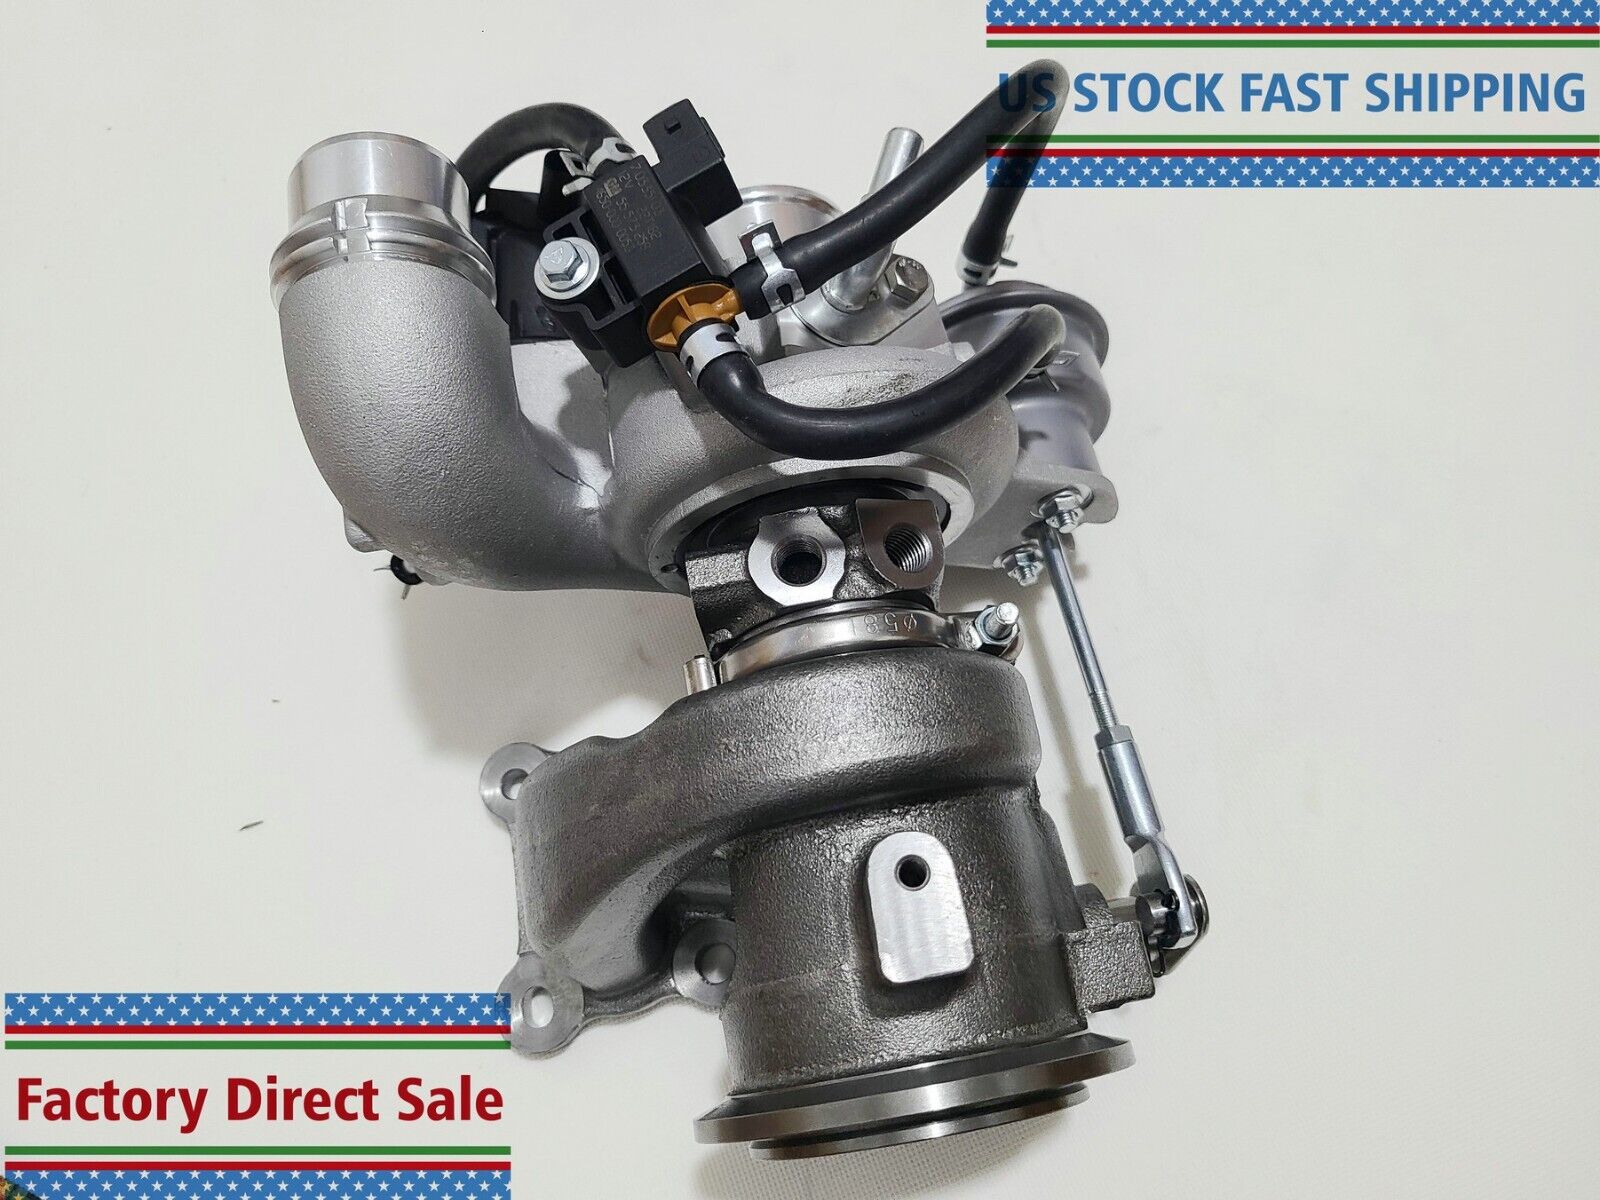 Turbo For Chevy Cruze 1.4T & Buick Encore 1.4L 2016 2017 2018 2019 Turbocharger